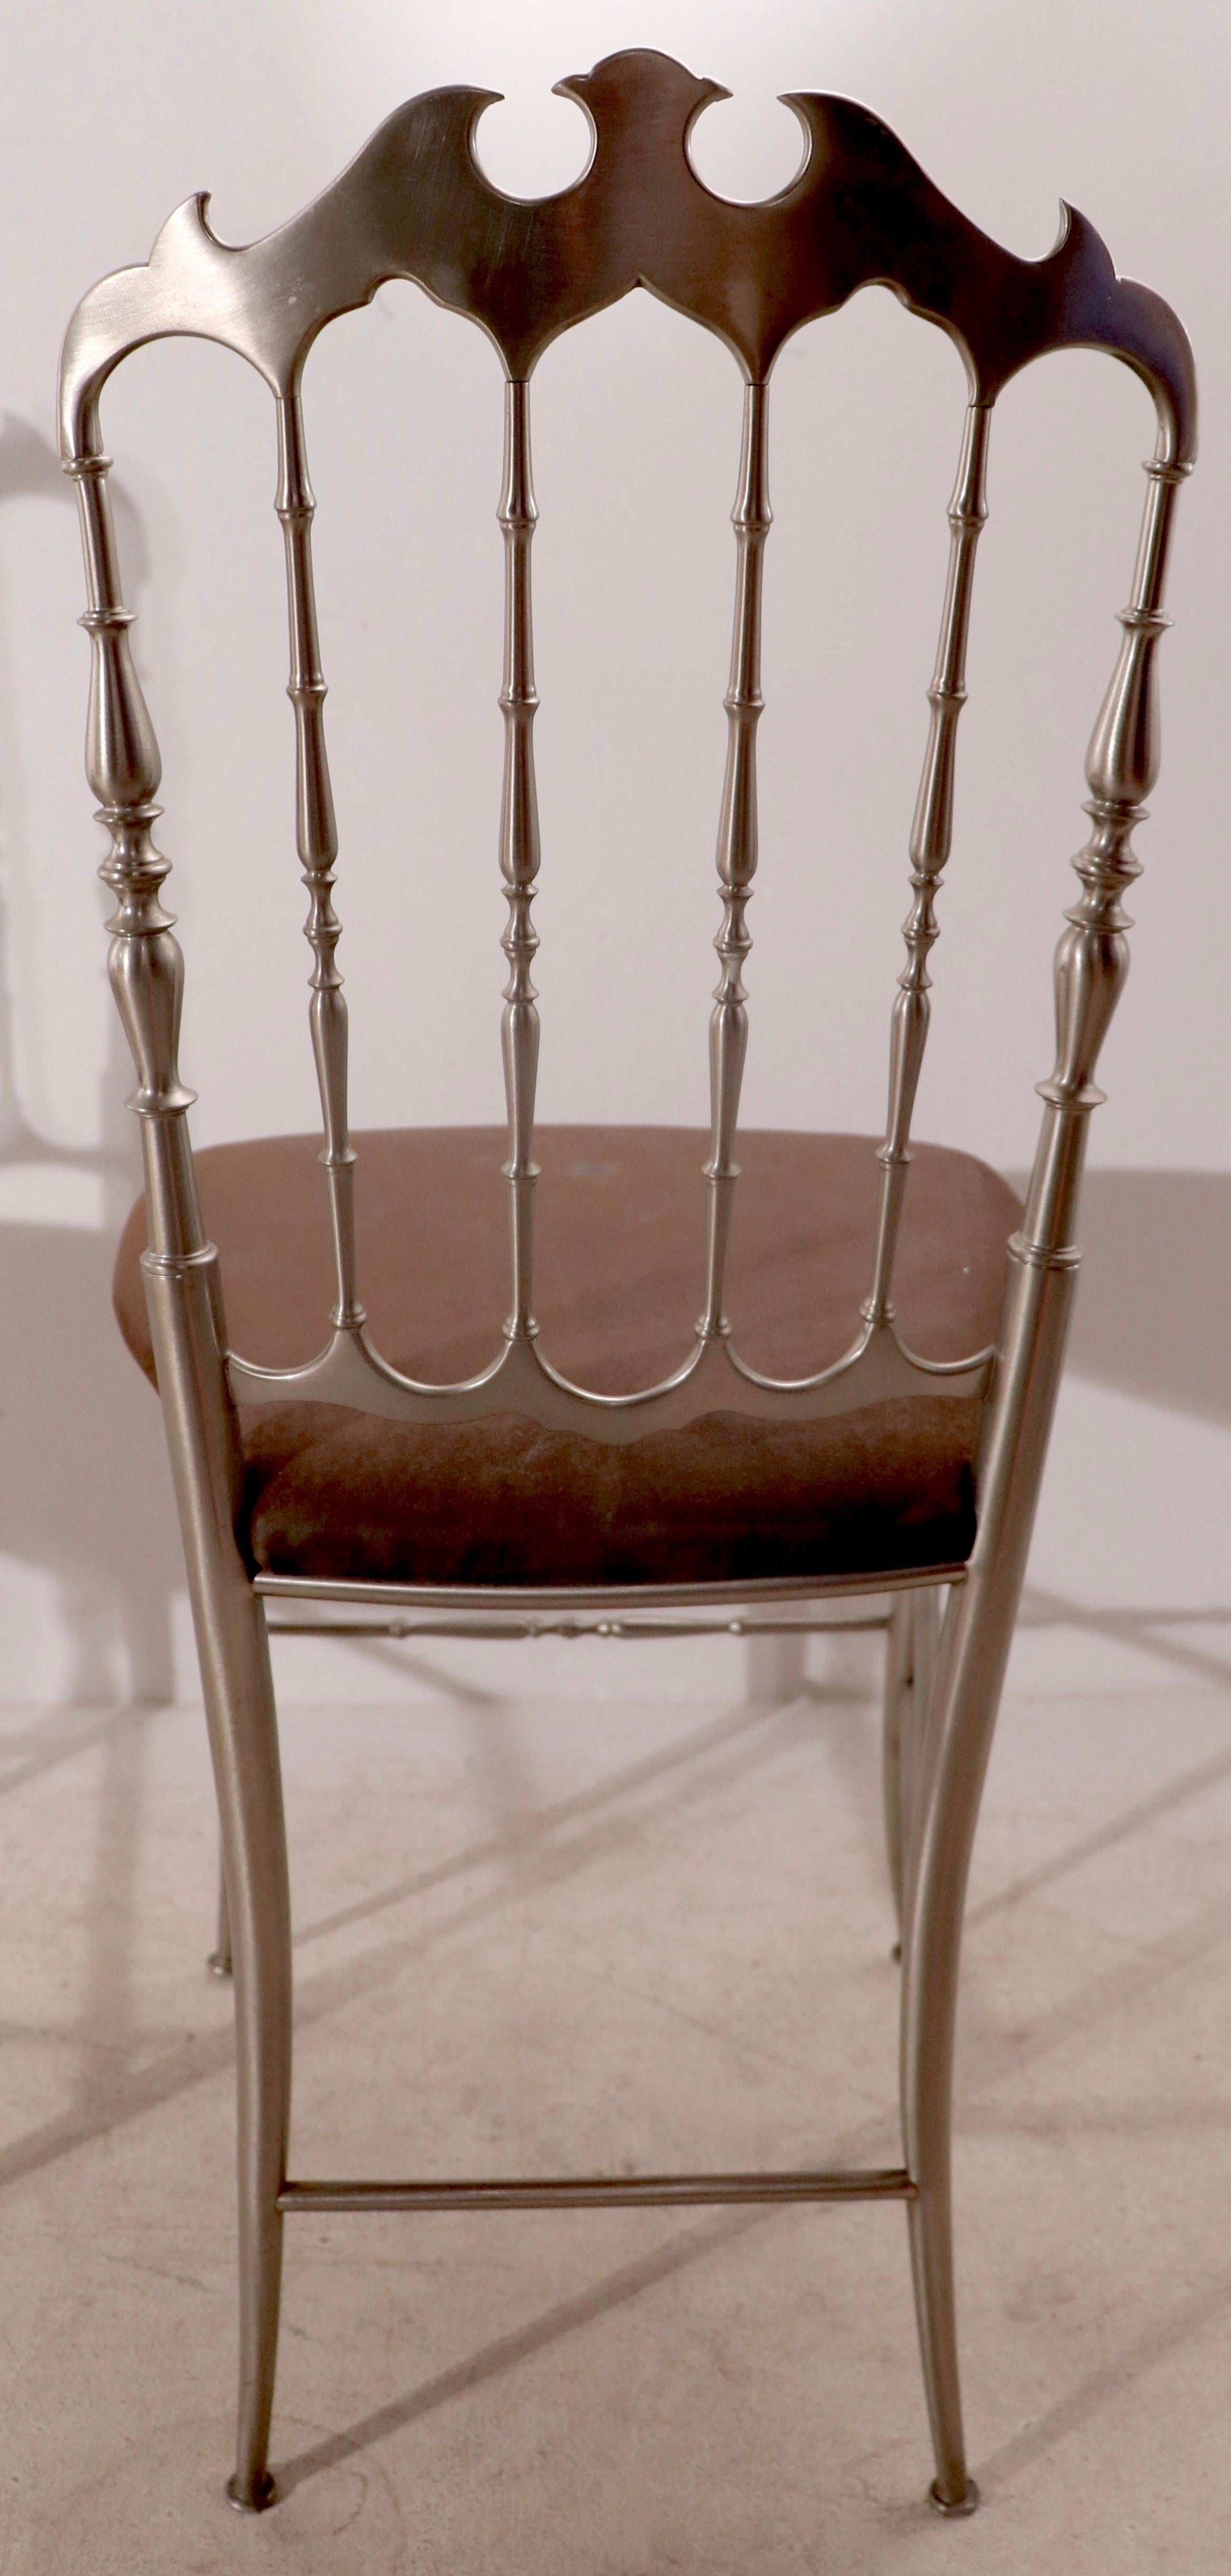 Italian Set of Charivari Chairs in Steel Finish from Made in Italy retailed by WJ Sloane For Sale